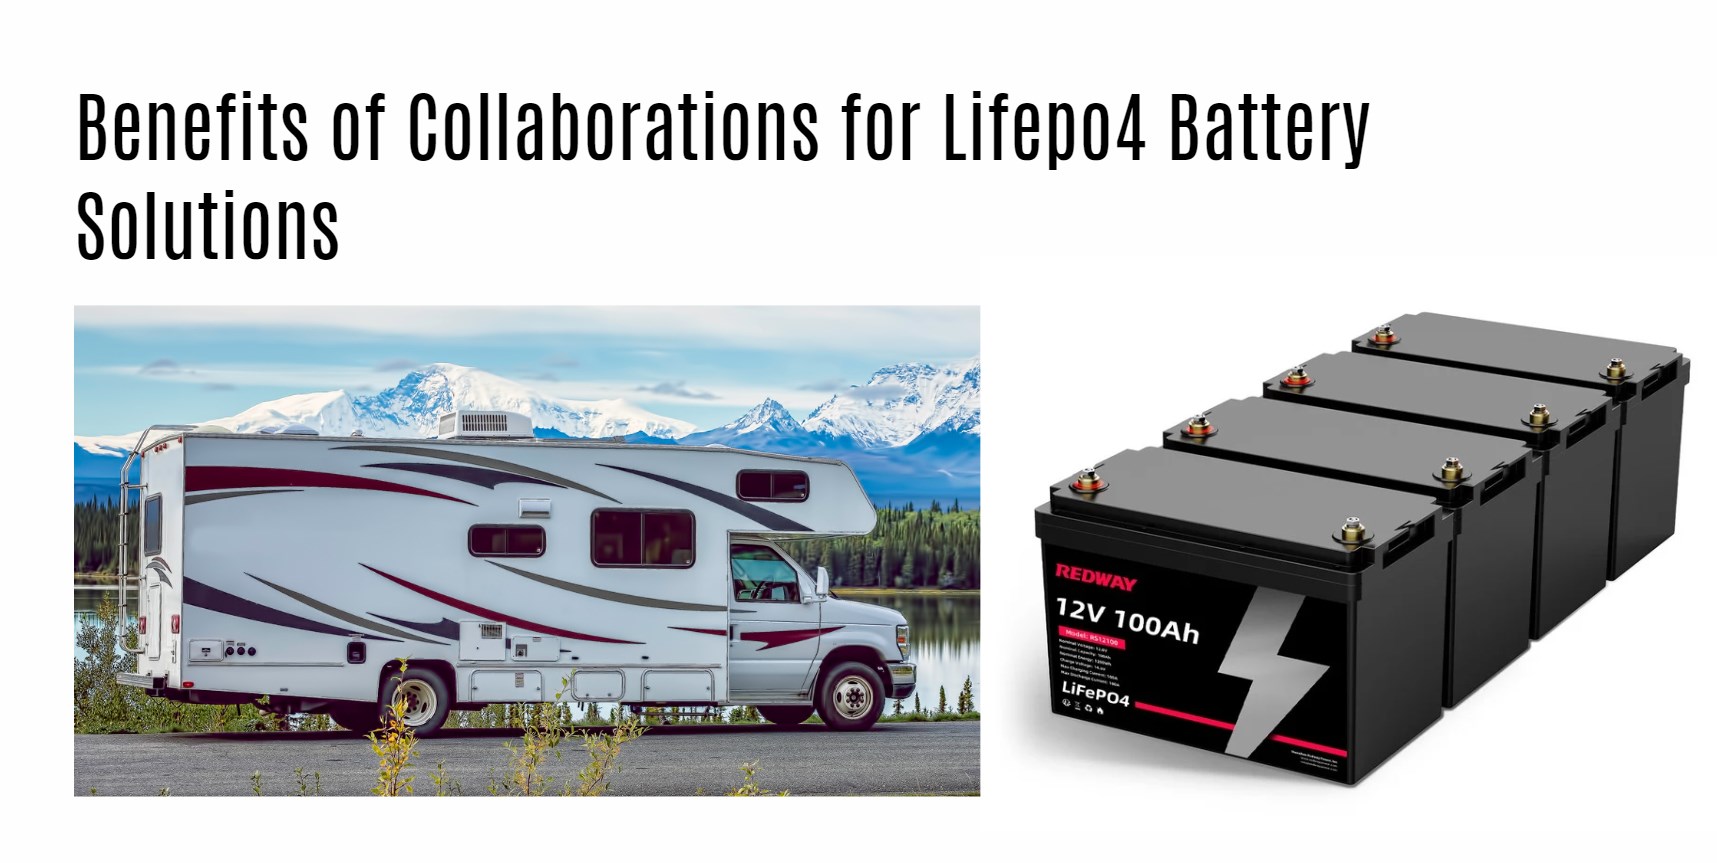 Benefits of Collaborations for Lifepo4 Battery Solutions. 12v 100ah lithium battery factory oem app bluetooth